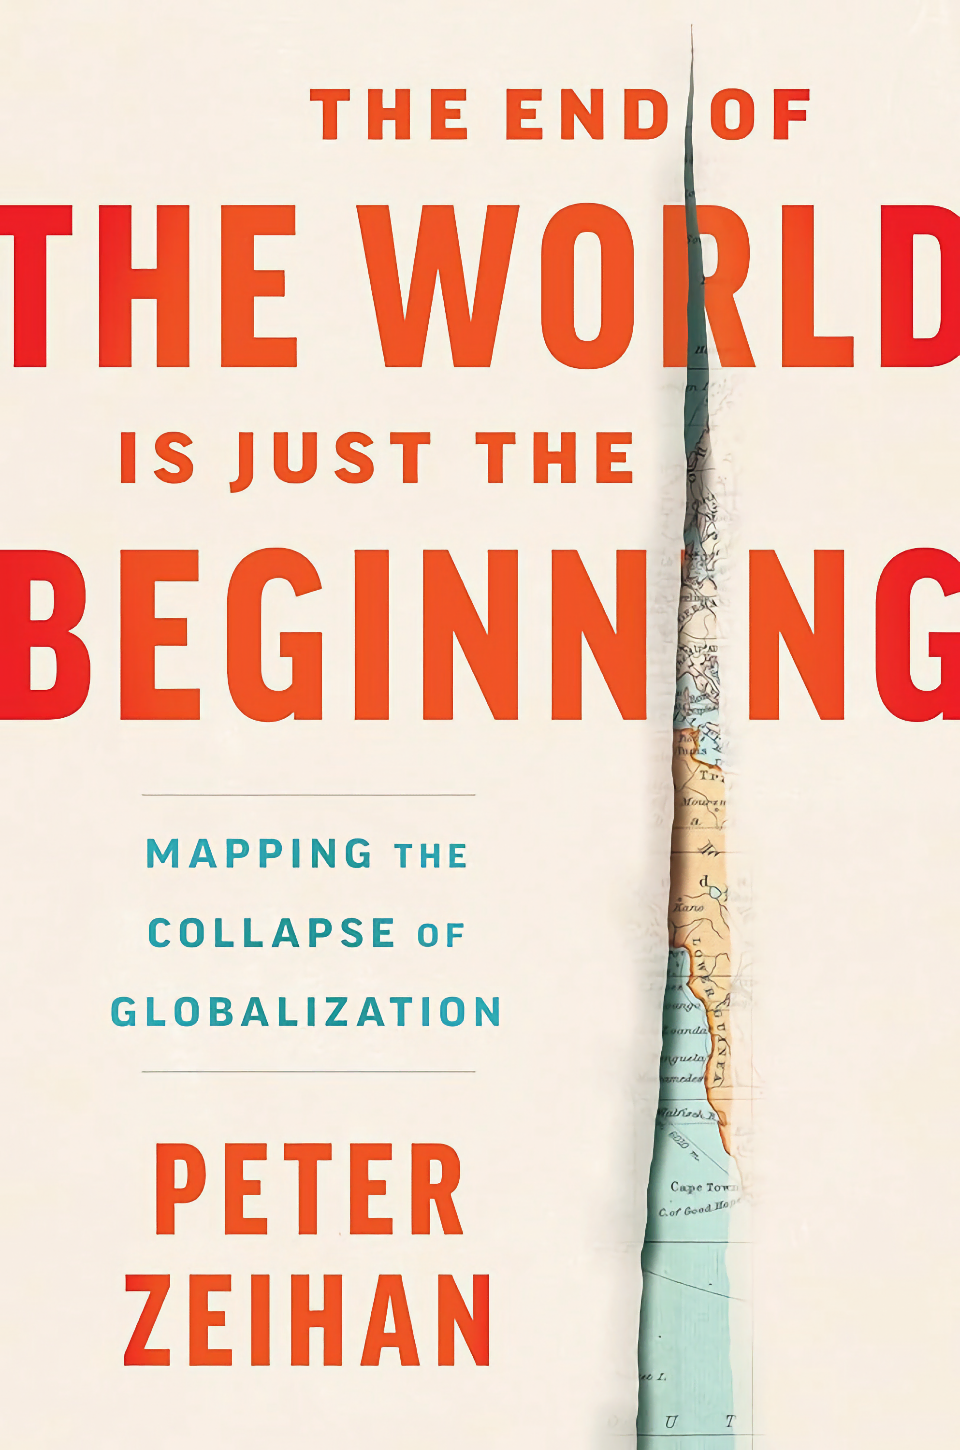 The End of the World Is Just the Beginning: Mapping the Collapse of Globalization by Peter Zeihan